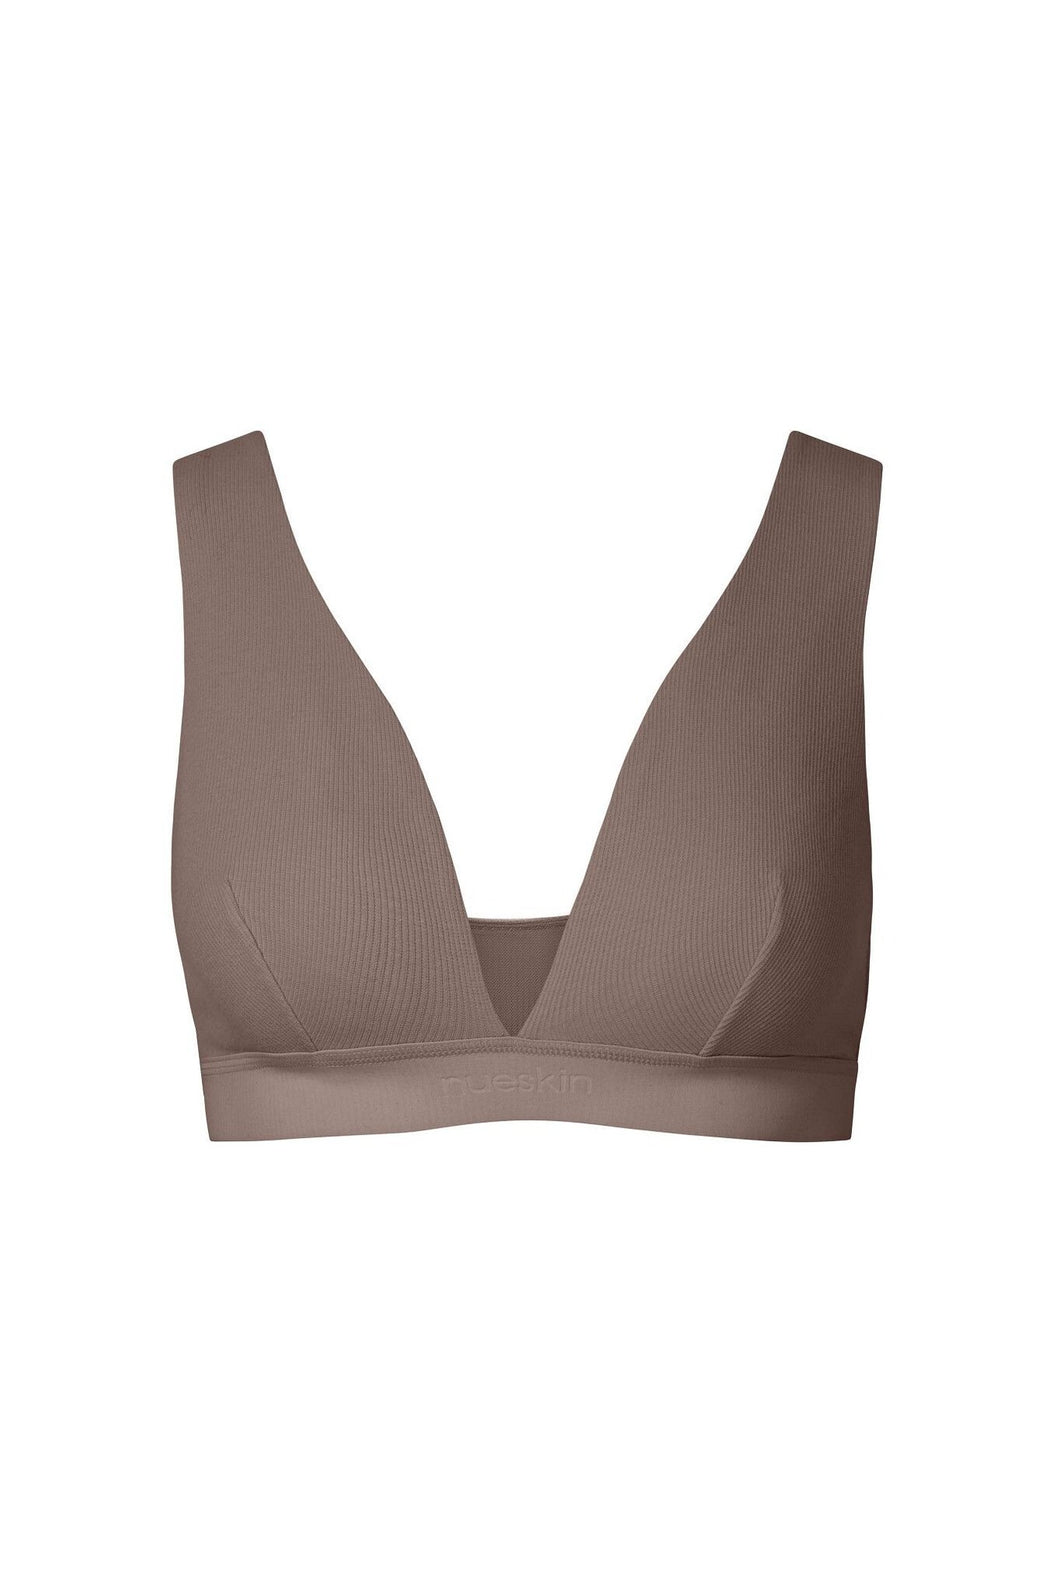 nueskin Shae in color Deep Taupe and shape triangle